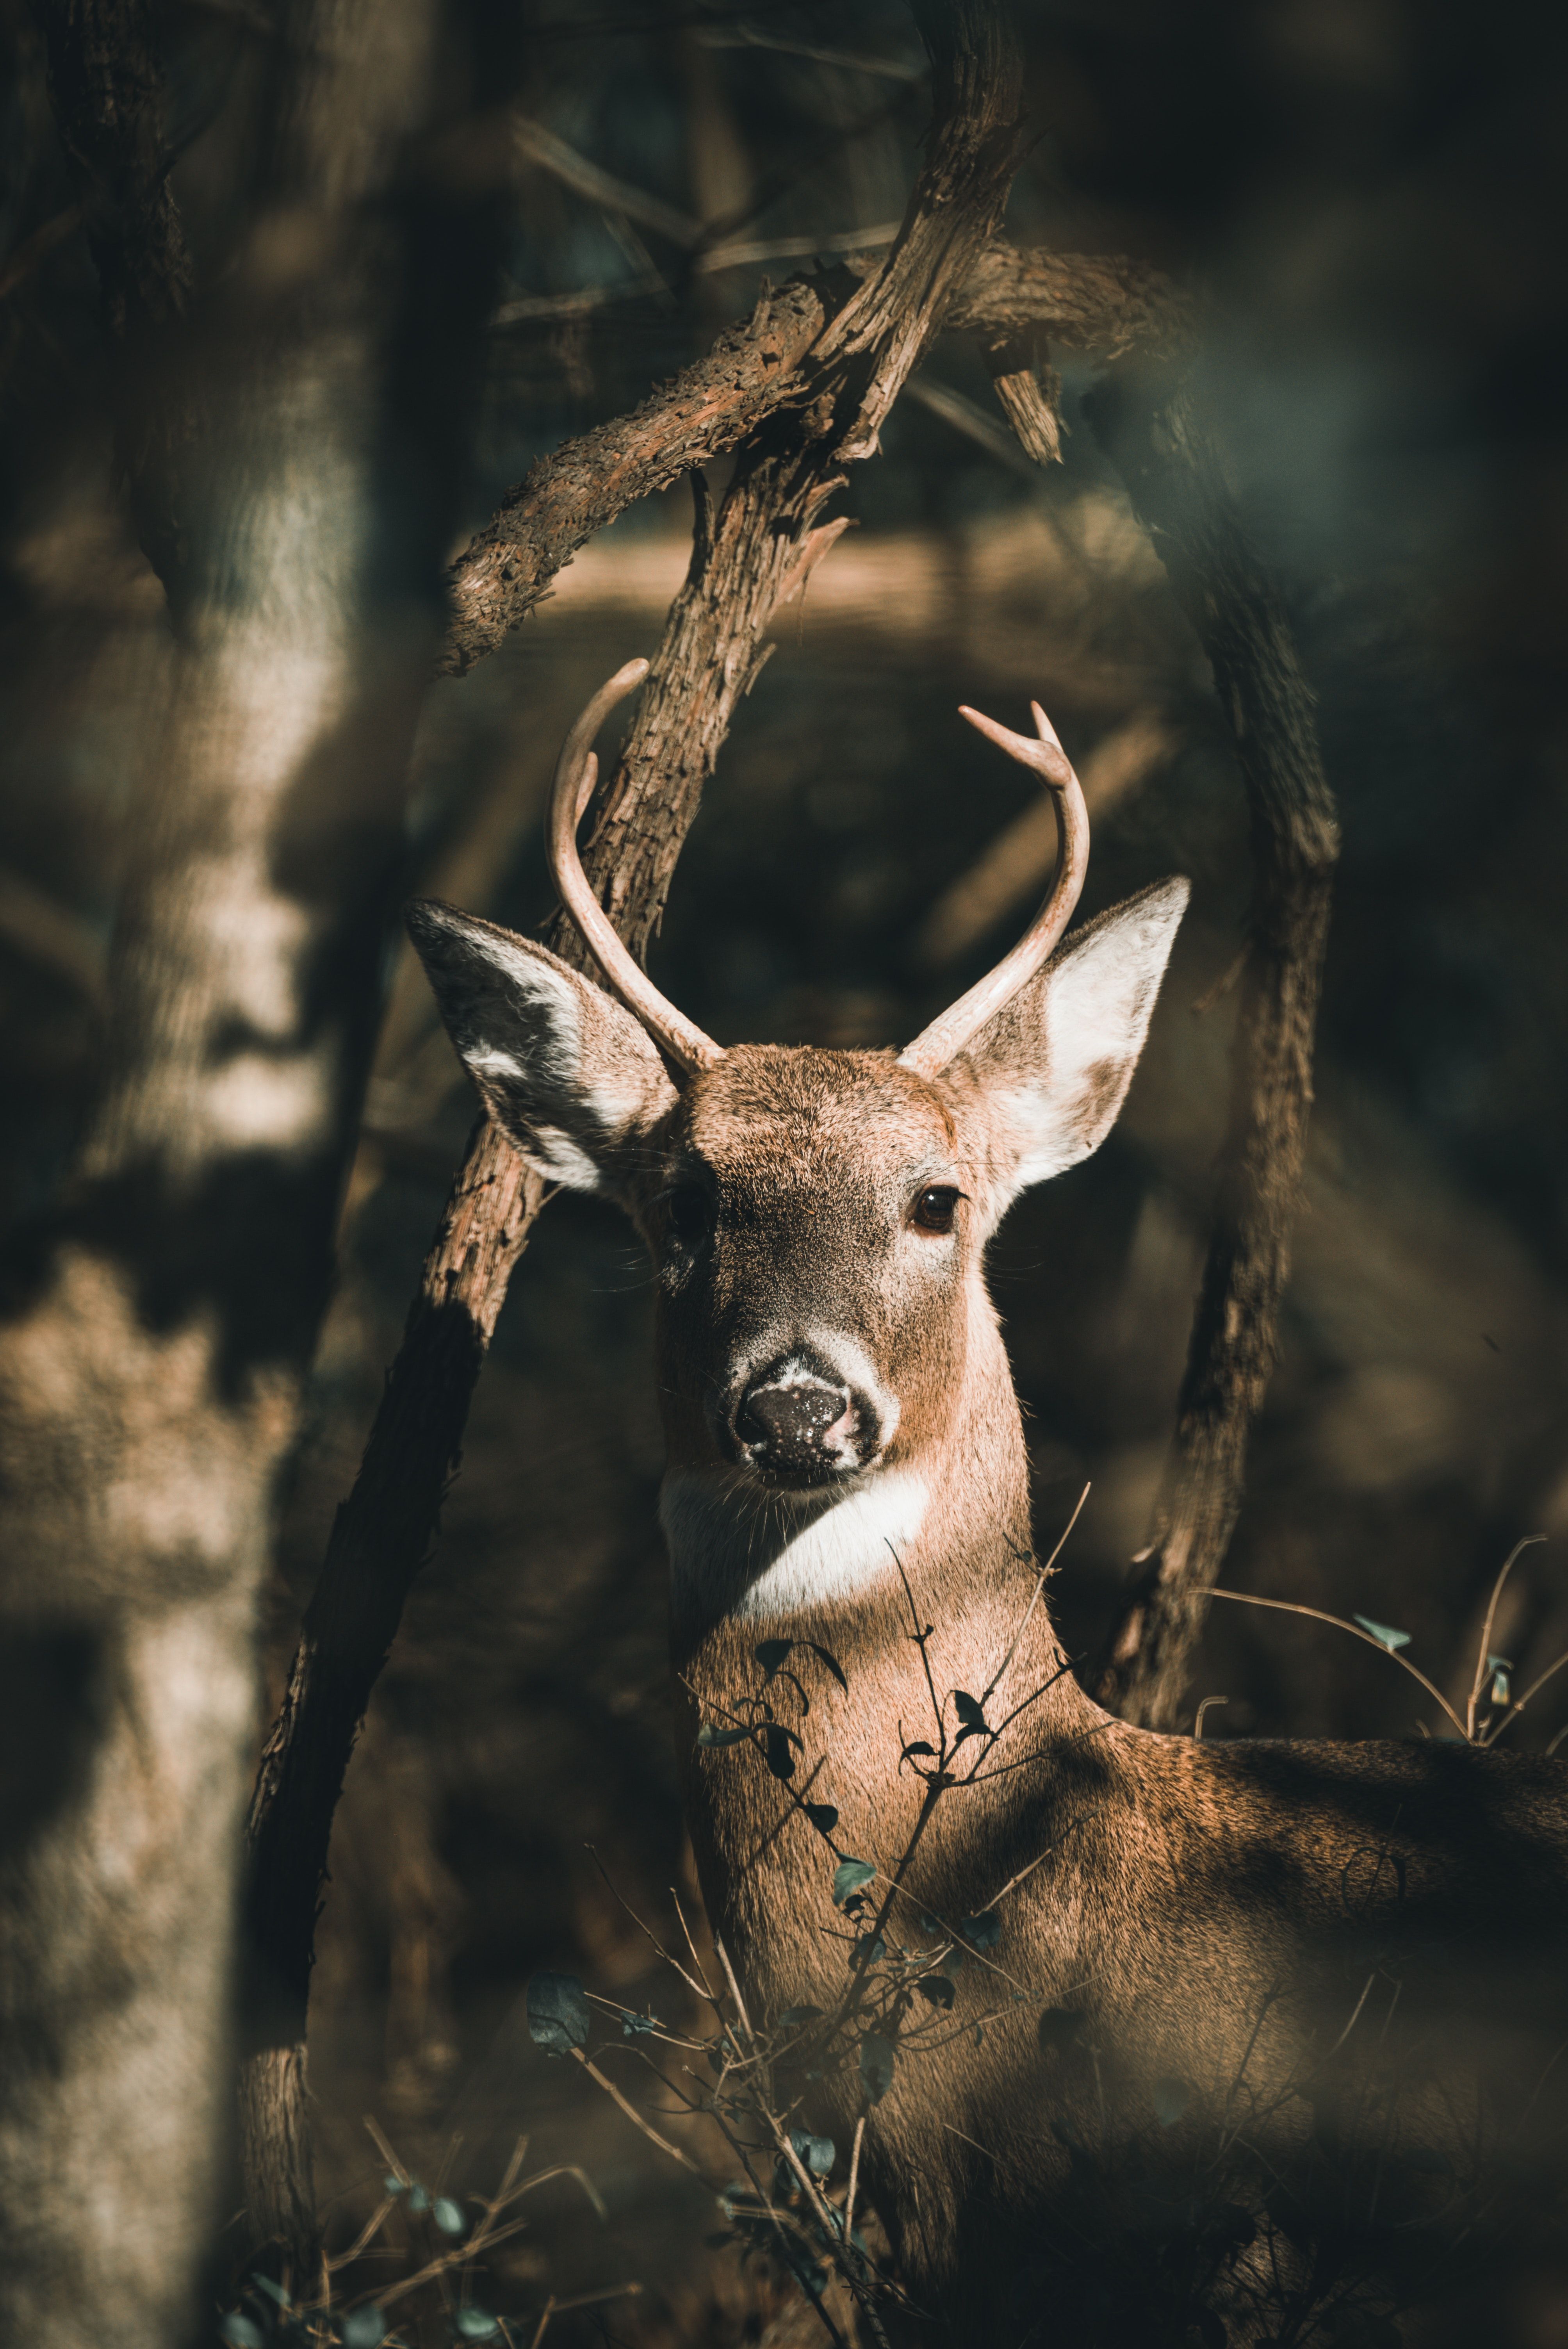 A deer is looking out from behind some trees - Deer